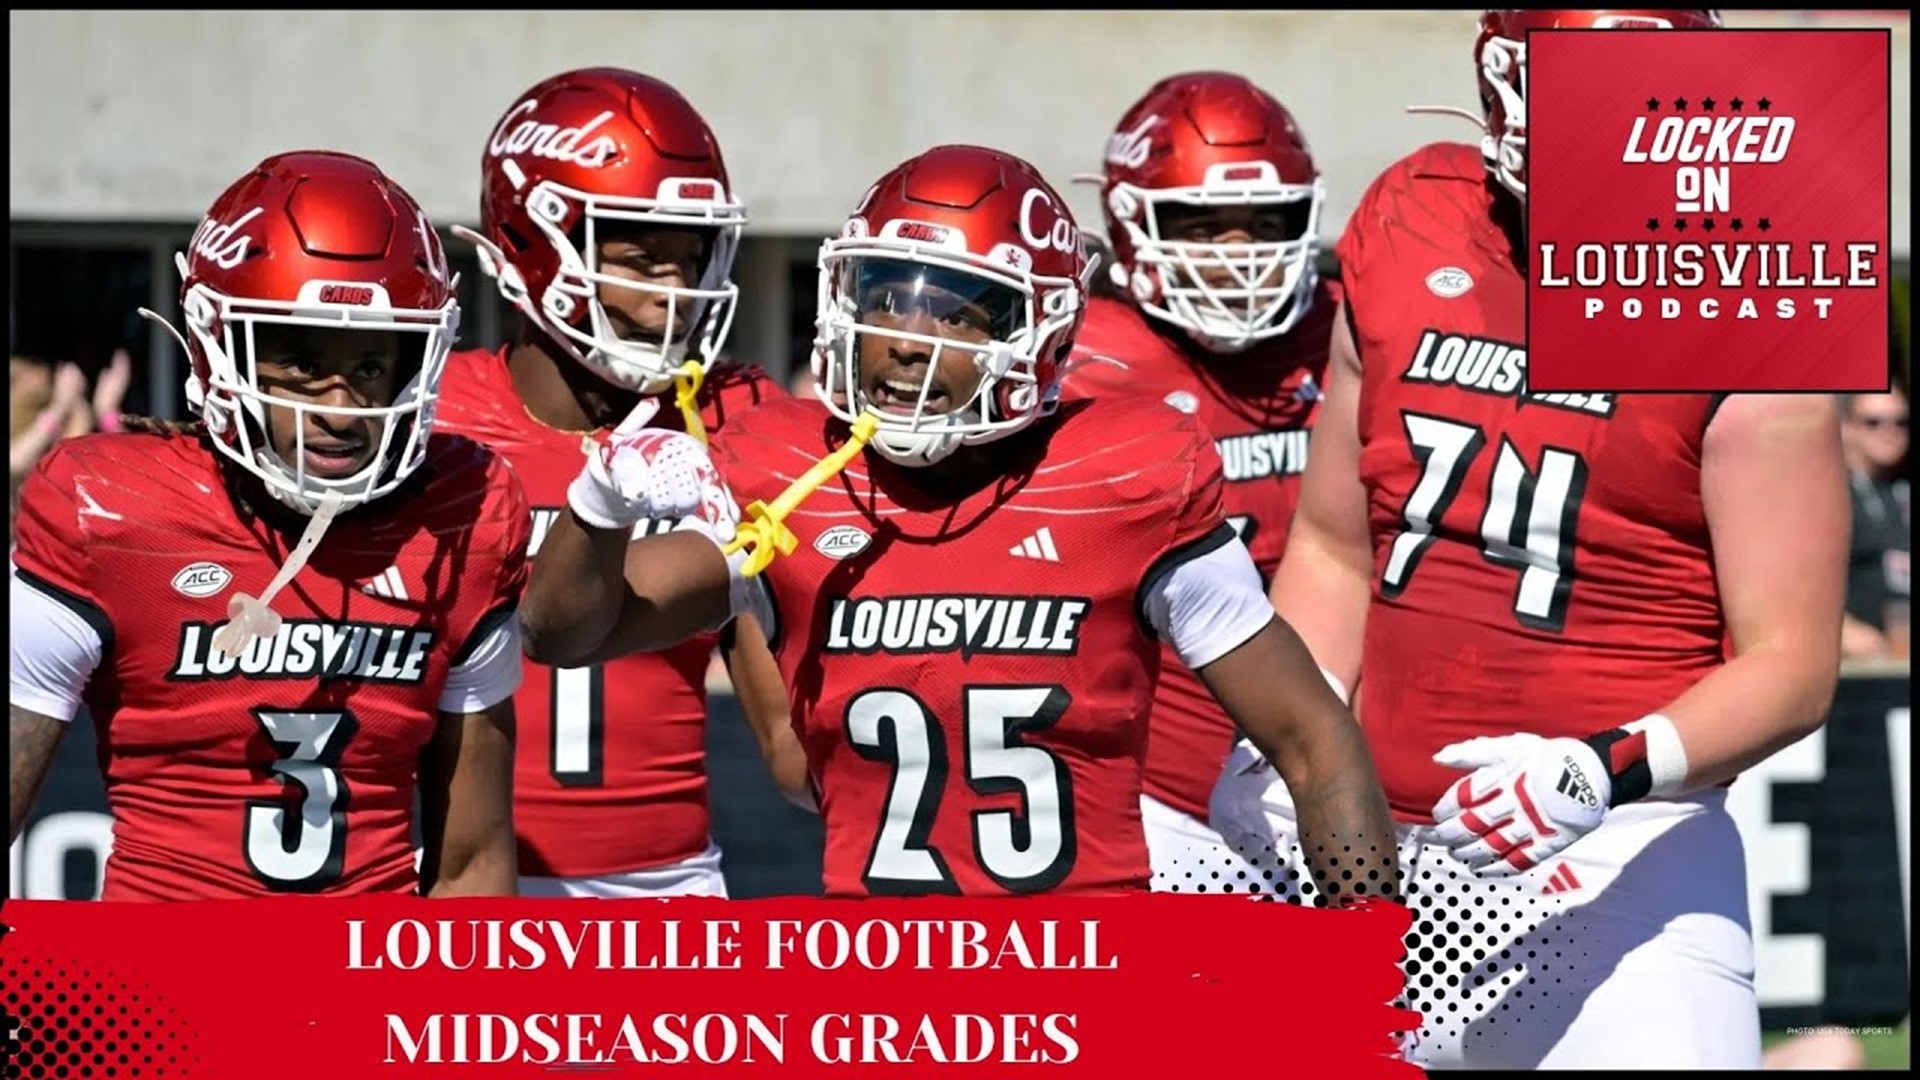 Louisville high school football: Which teams has the best uniforms?